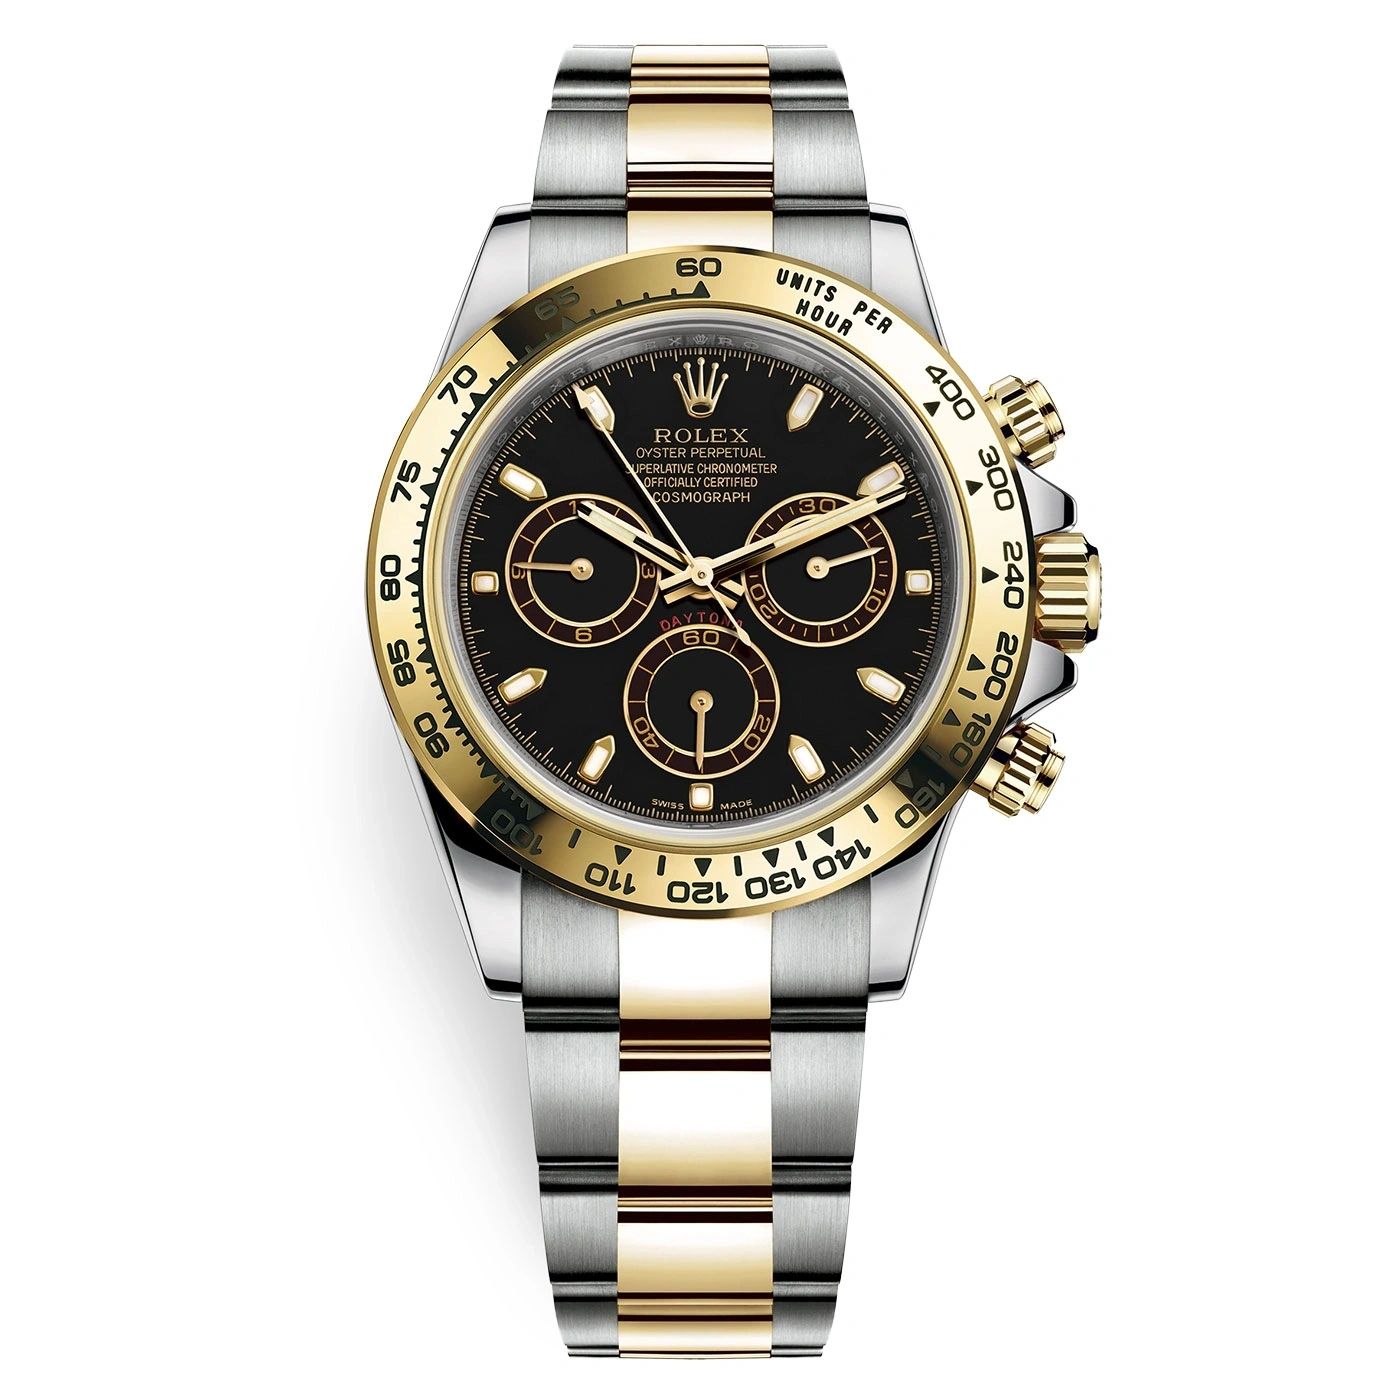 Rolex Daytona Cosmograph Steel and Yellow Gold Black Index Dial 116503